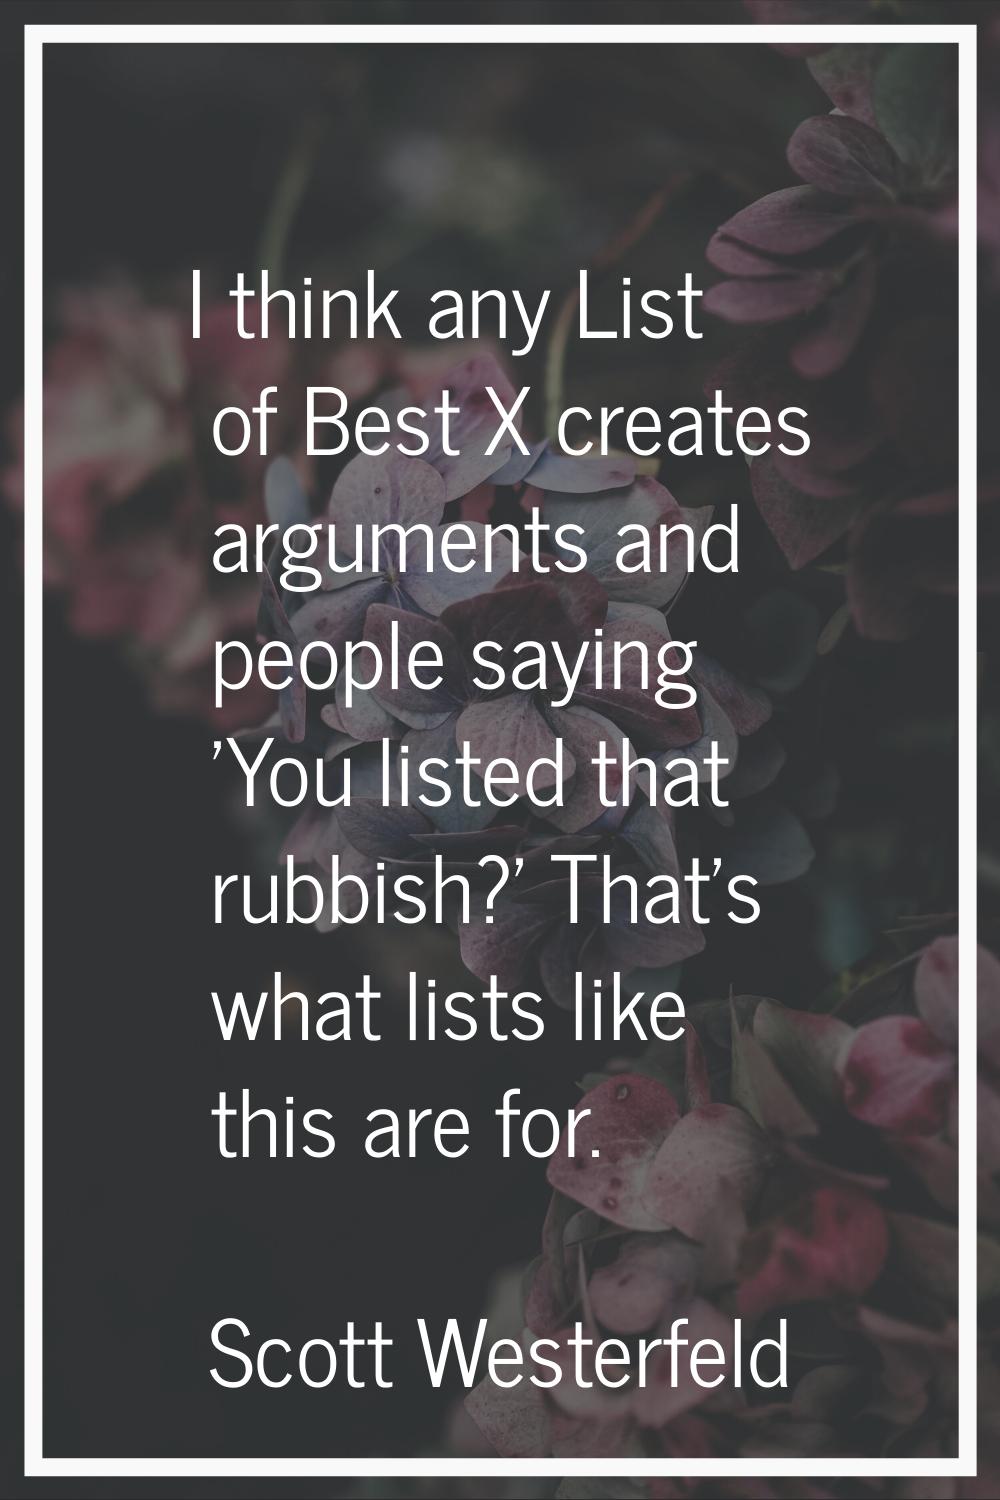 I think any List of Best X creates arguments and people saying 'You listed that rubbish?' That's wh